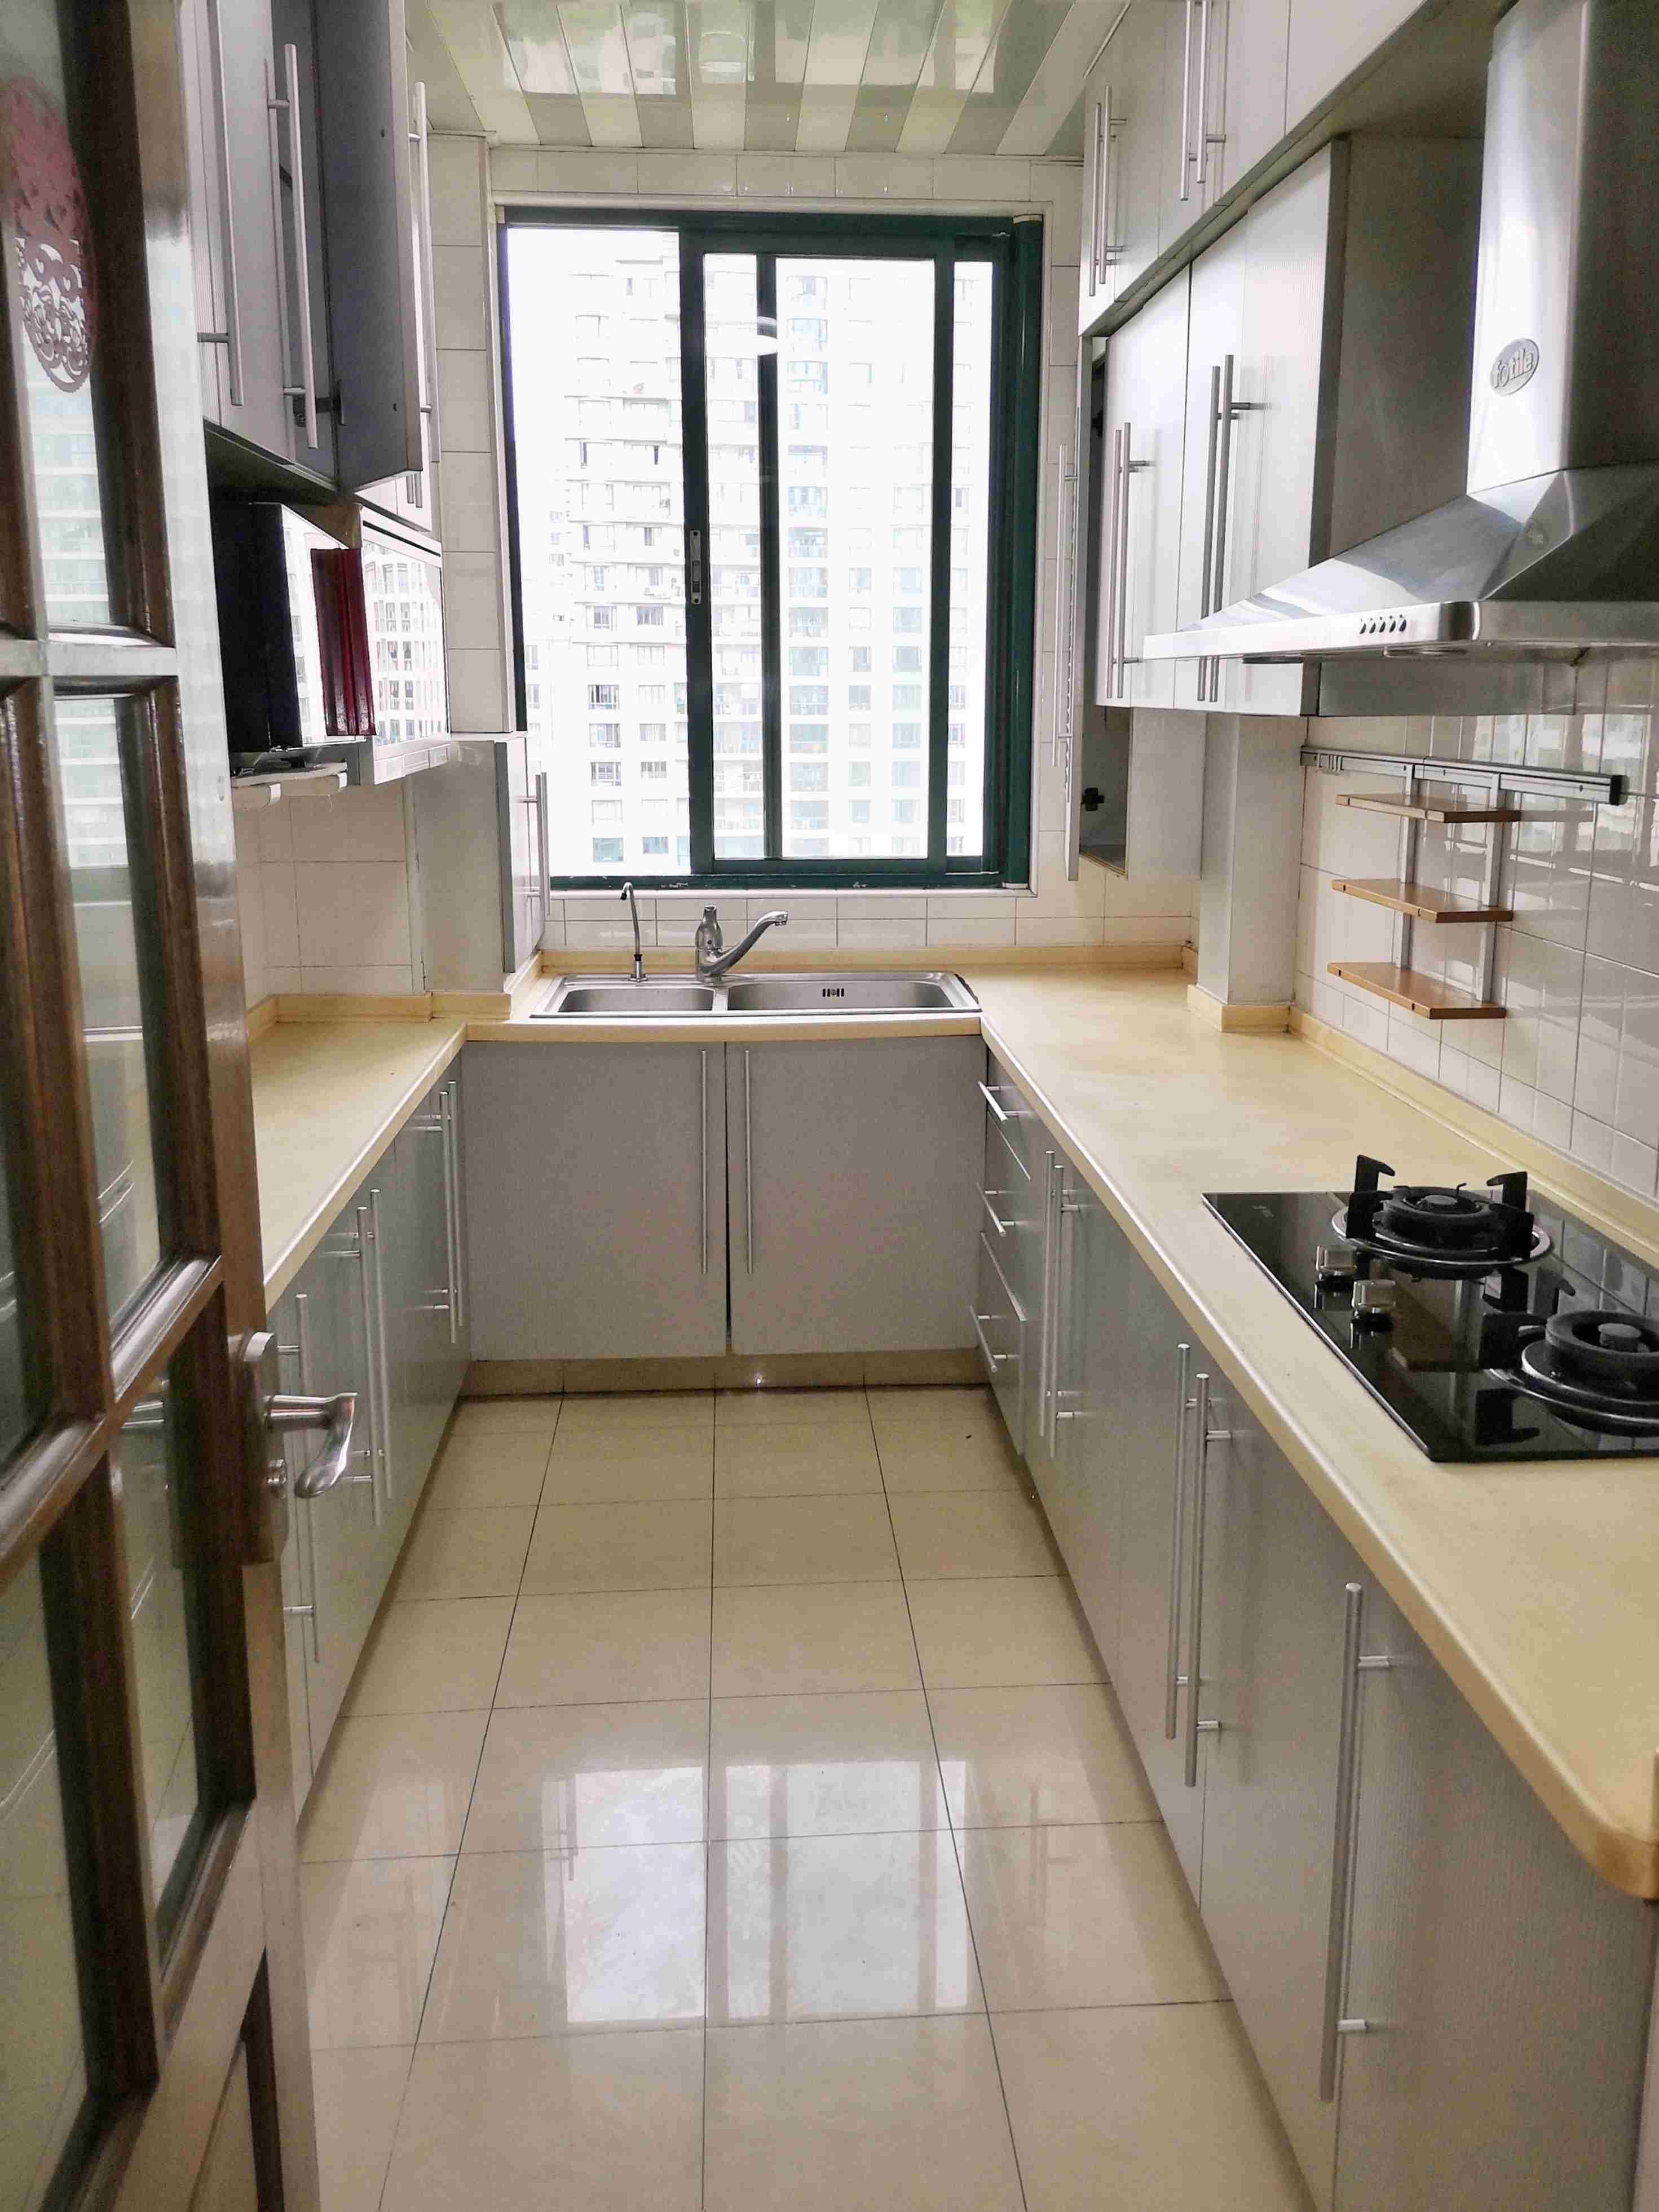 long kitchen Bright Spacious 3BR Apt for Rent nr Suzhou Creek in Shanghai